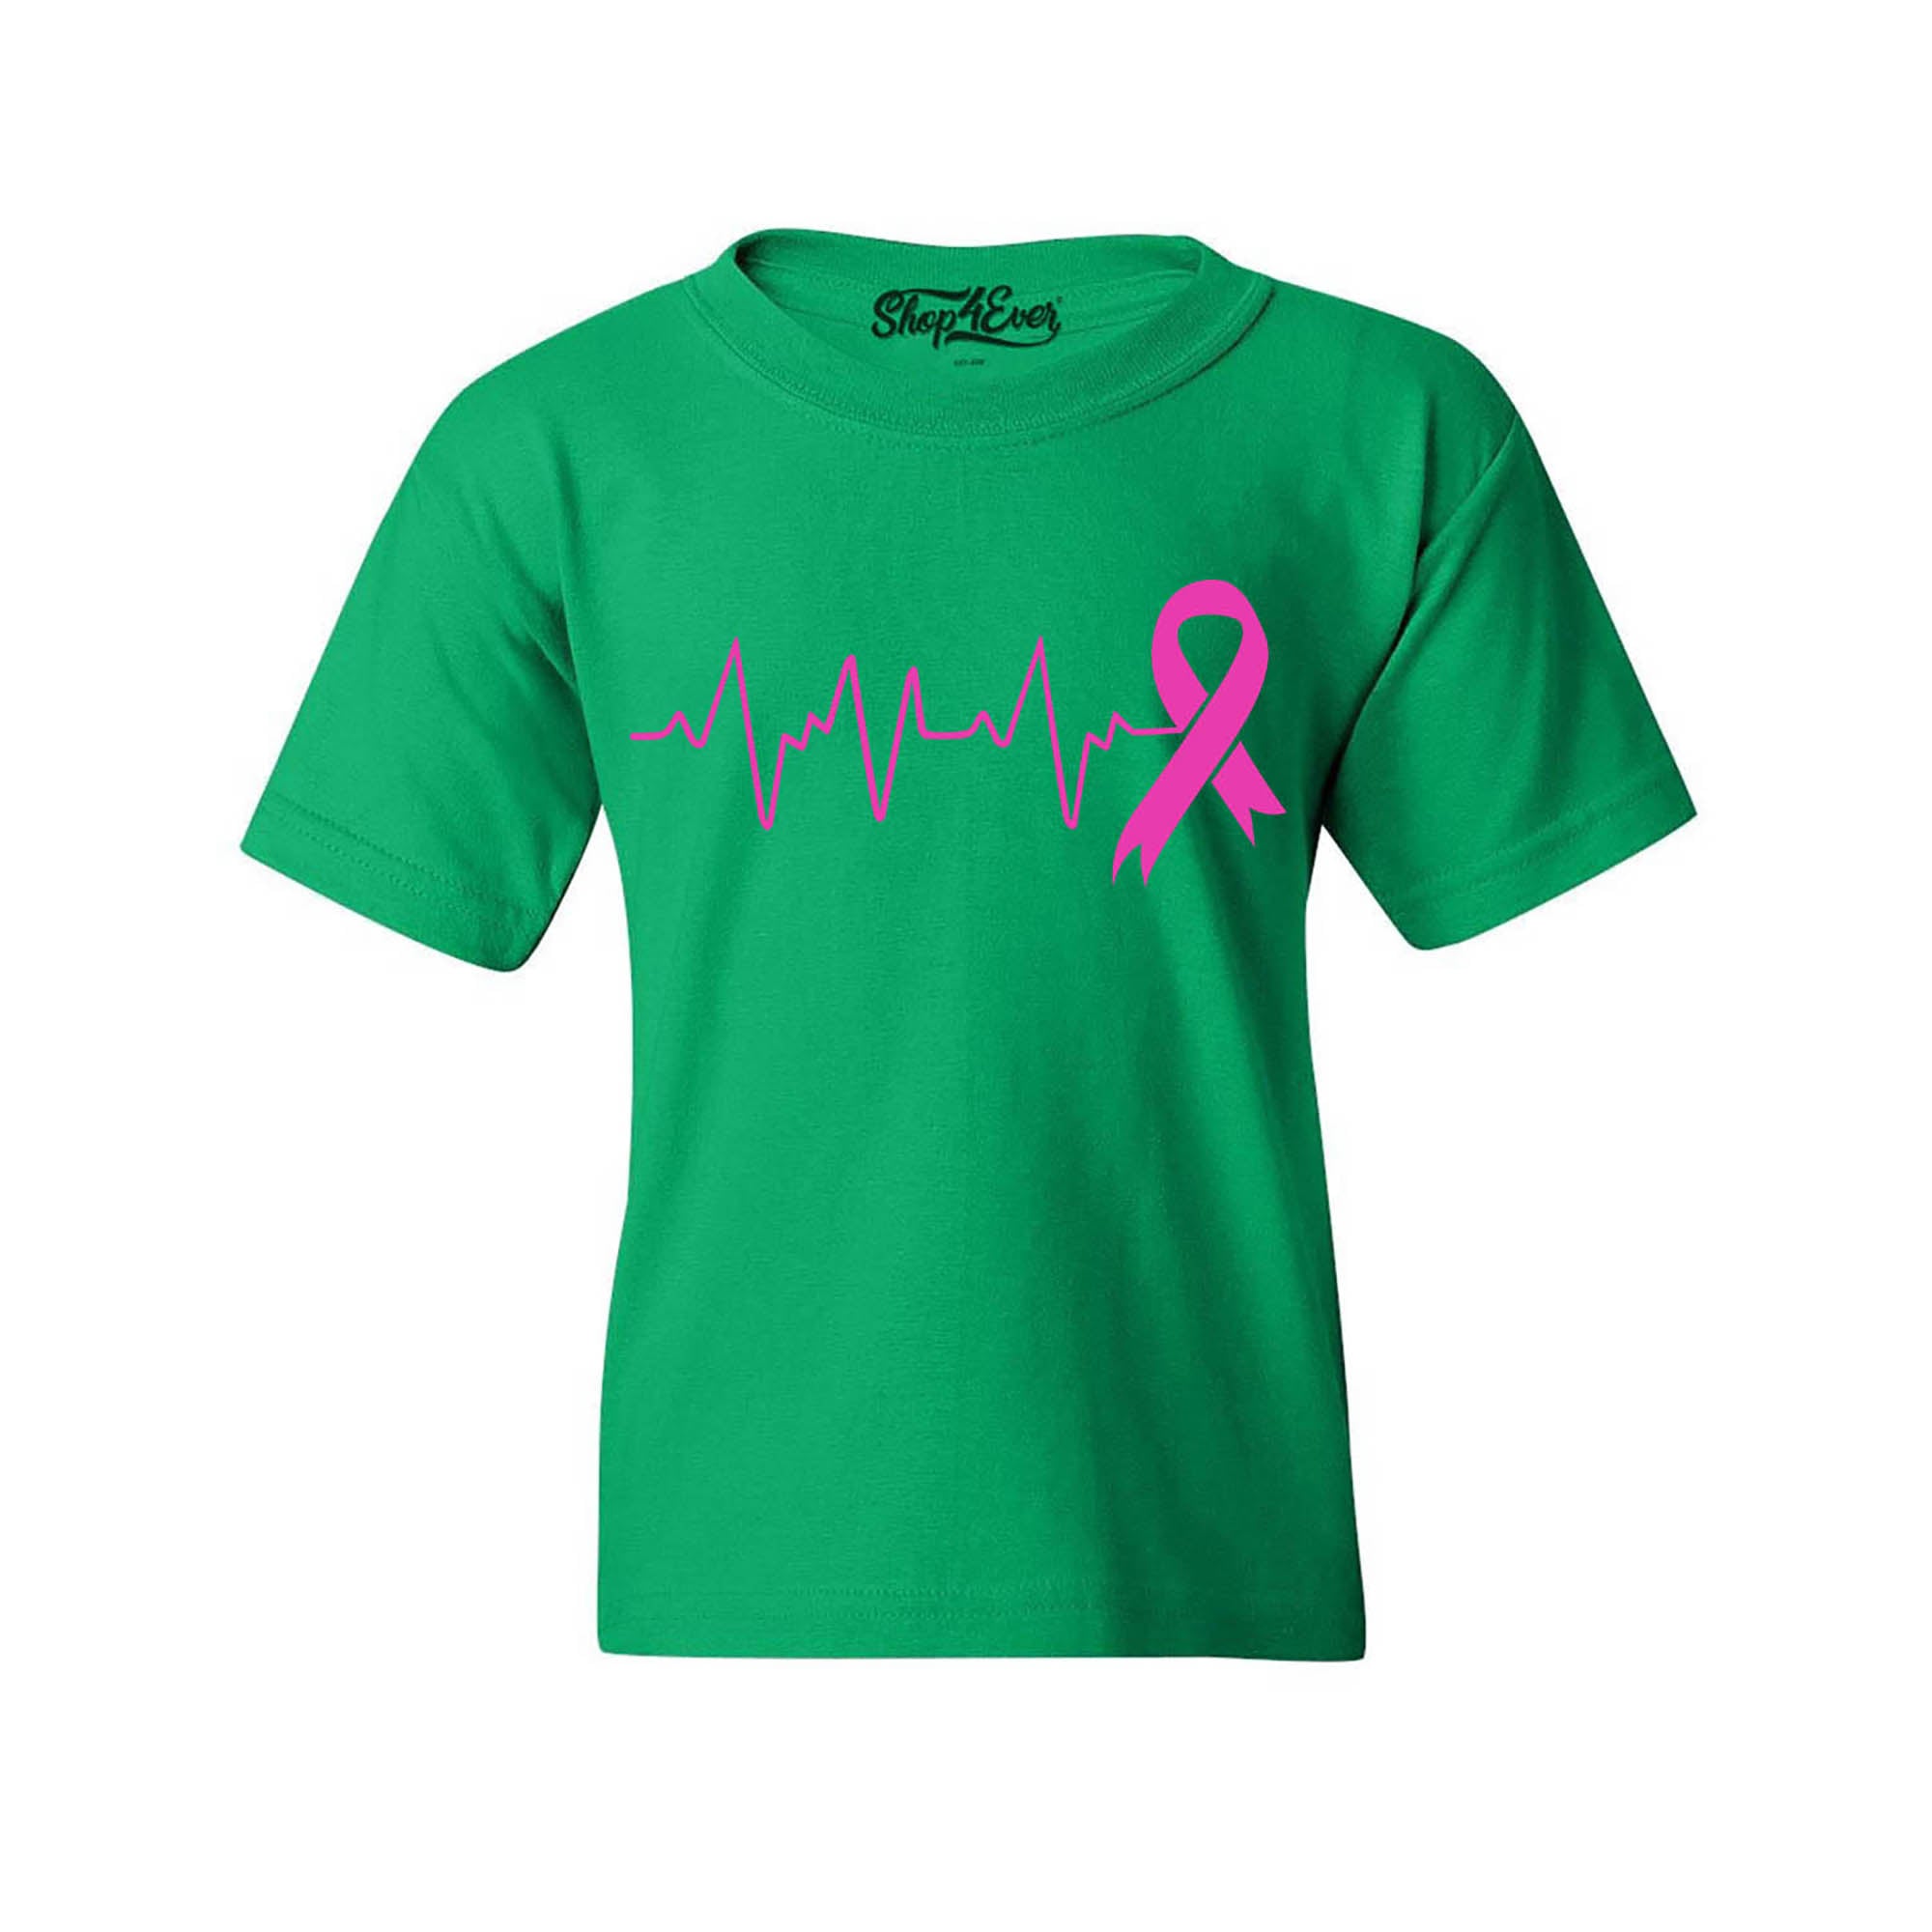 Heartbeat Pink Ribbon Breast Cancer Awareness Youth's T-Shirt